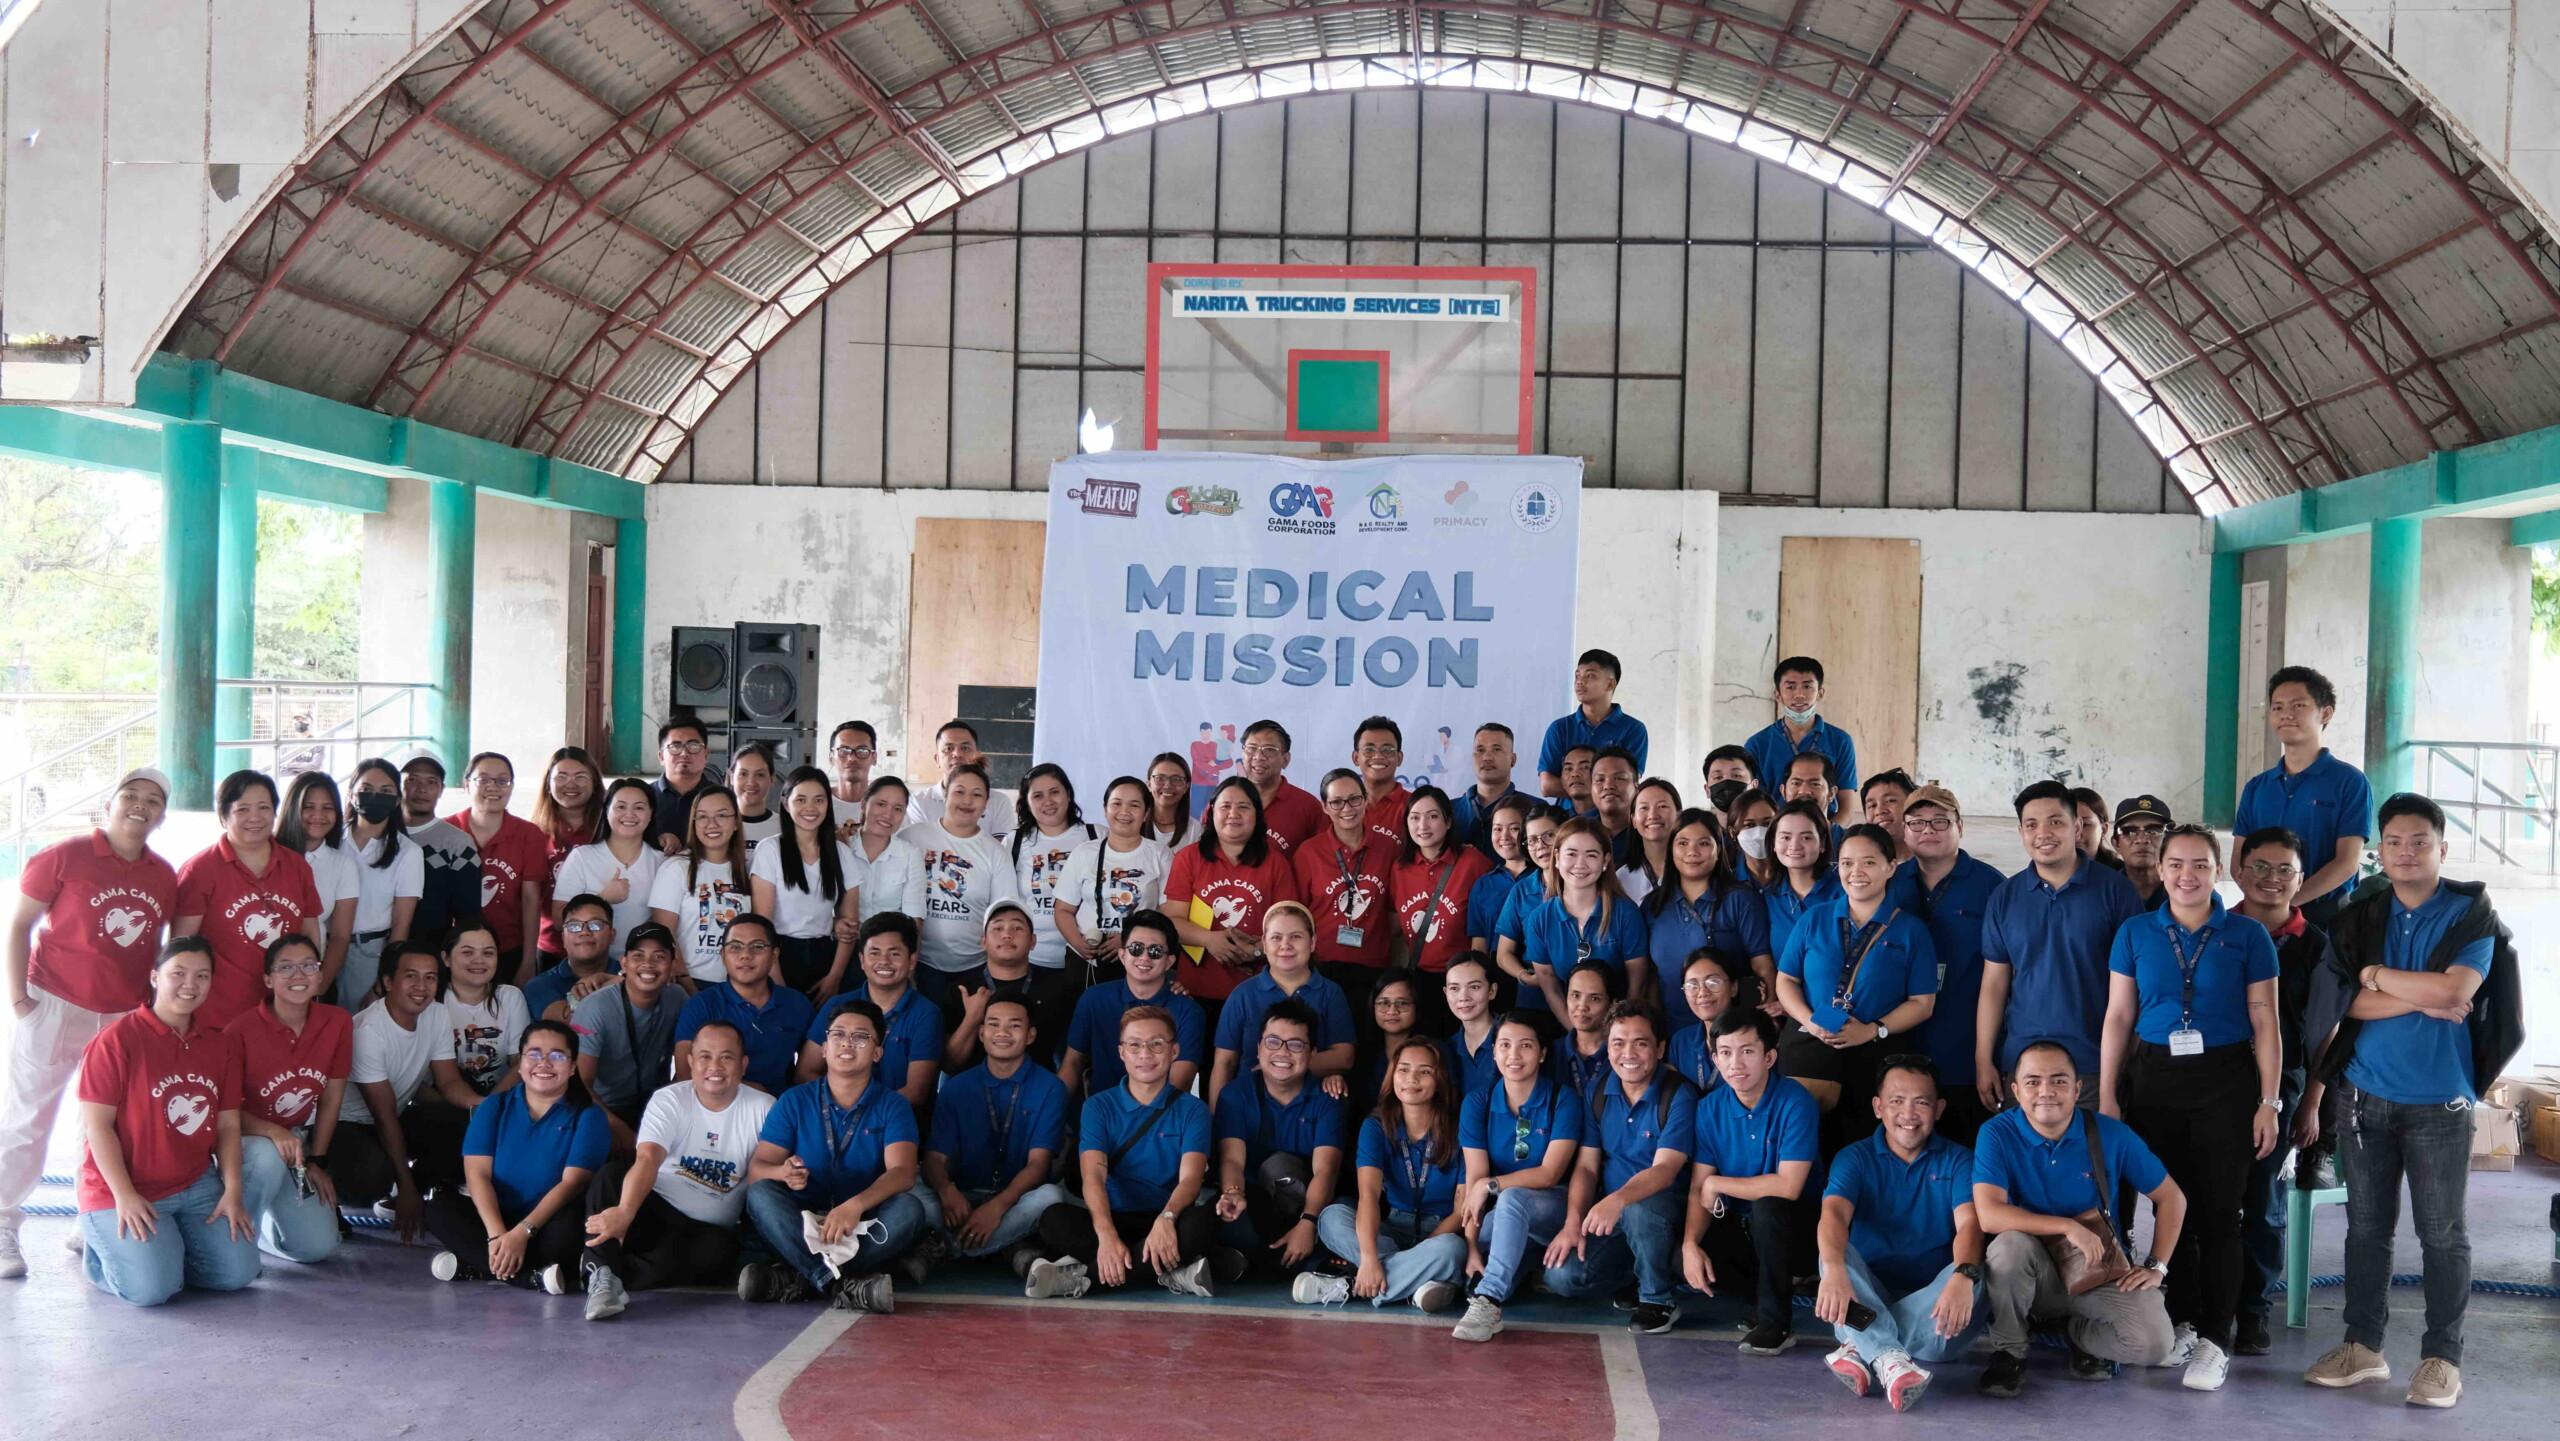 GAMA Foods Corporation Conducts Successful Medical Mission in Brgy. Mohon, Tagoloan